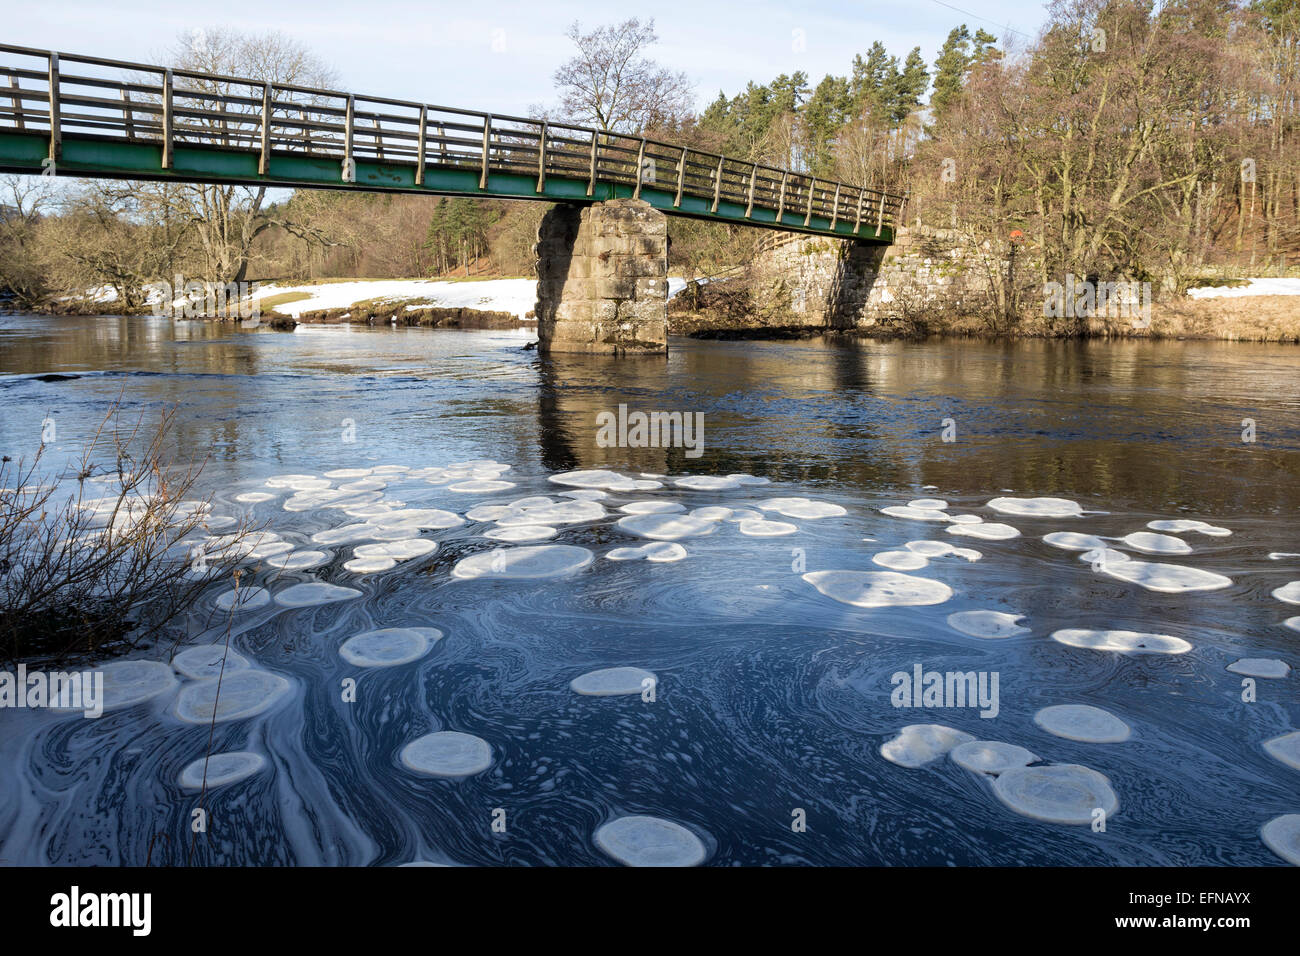 Holwick Head Bridge, Upper Teesdale, County Durham. UK Weather. Ice pancakes forming on the River Tees due to the continuing cold weather.  These frozen ice discs only form when temperatures dip well below freezing overnight and then as they thaw during the day they bump into each other and create rounded plates. Credit:  David Forster/Alamy Live News Stock Photo